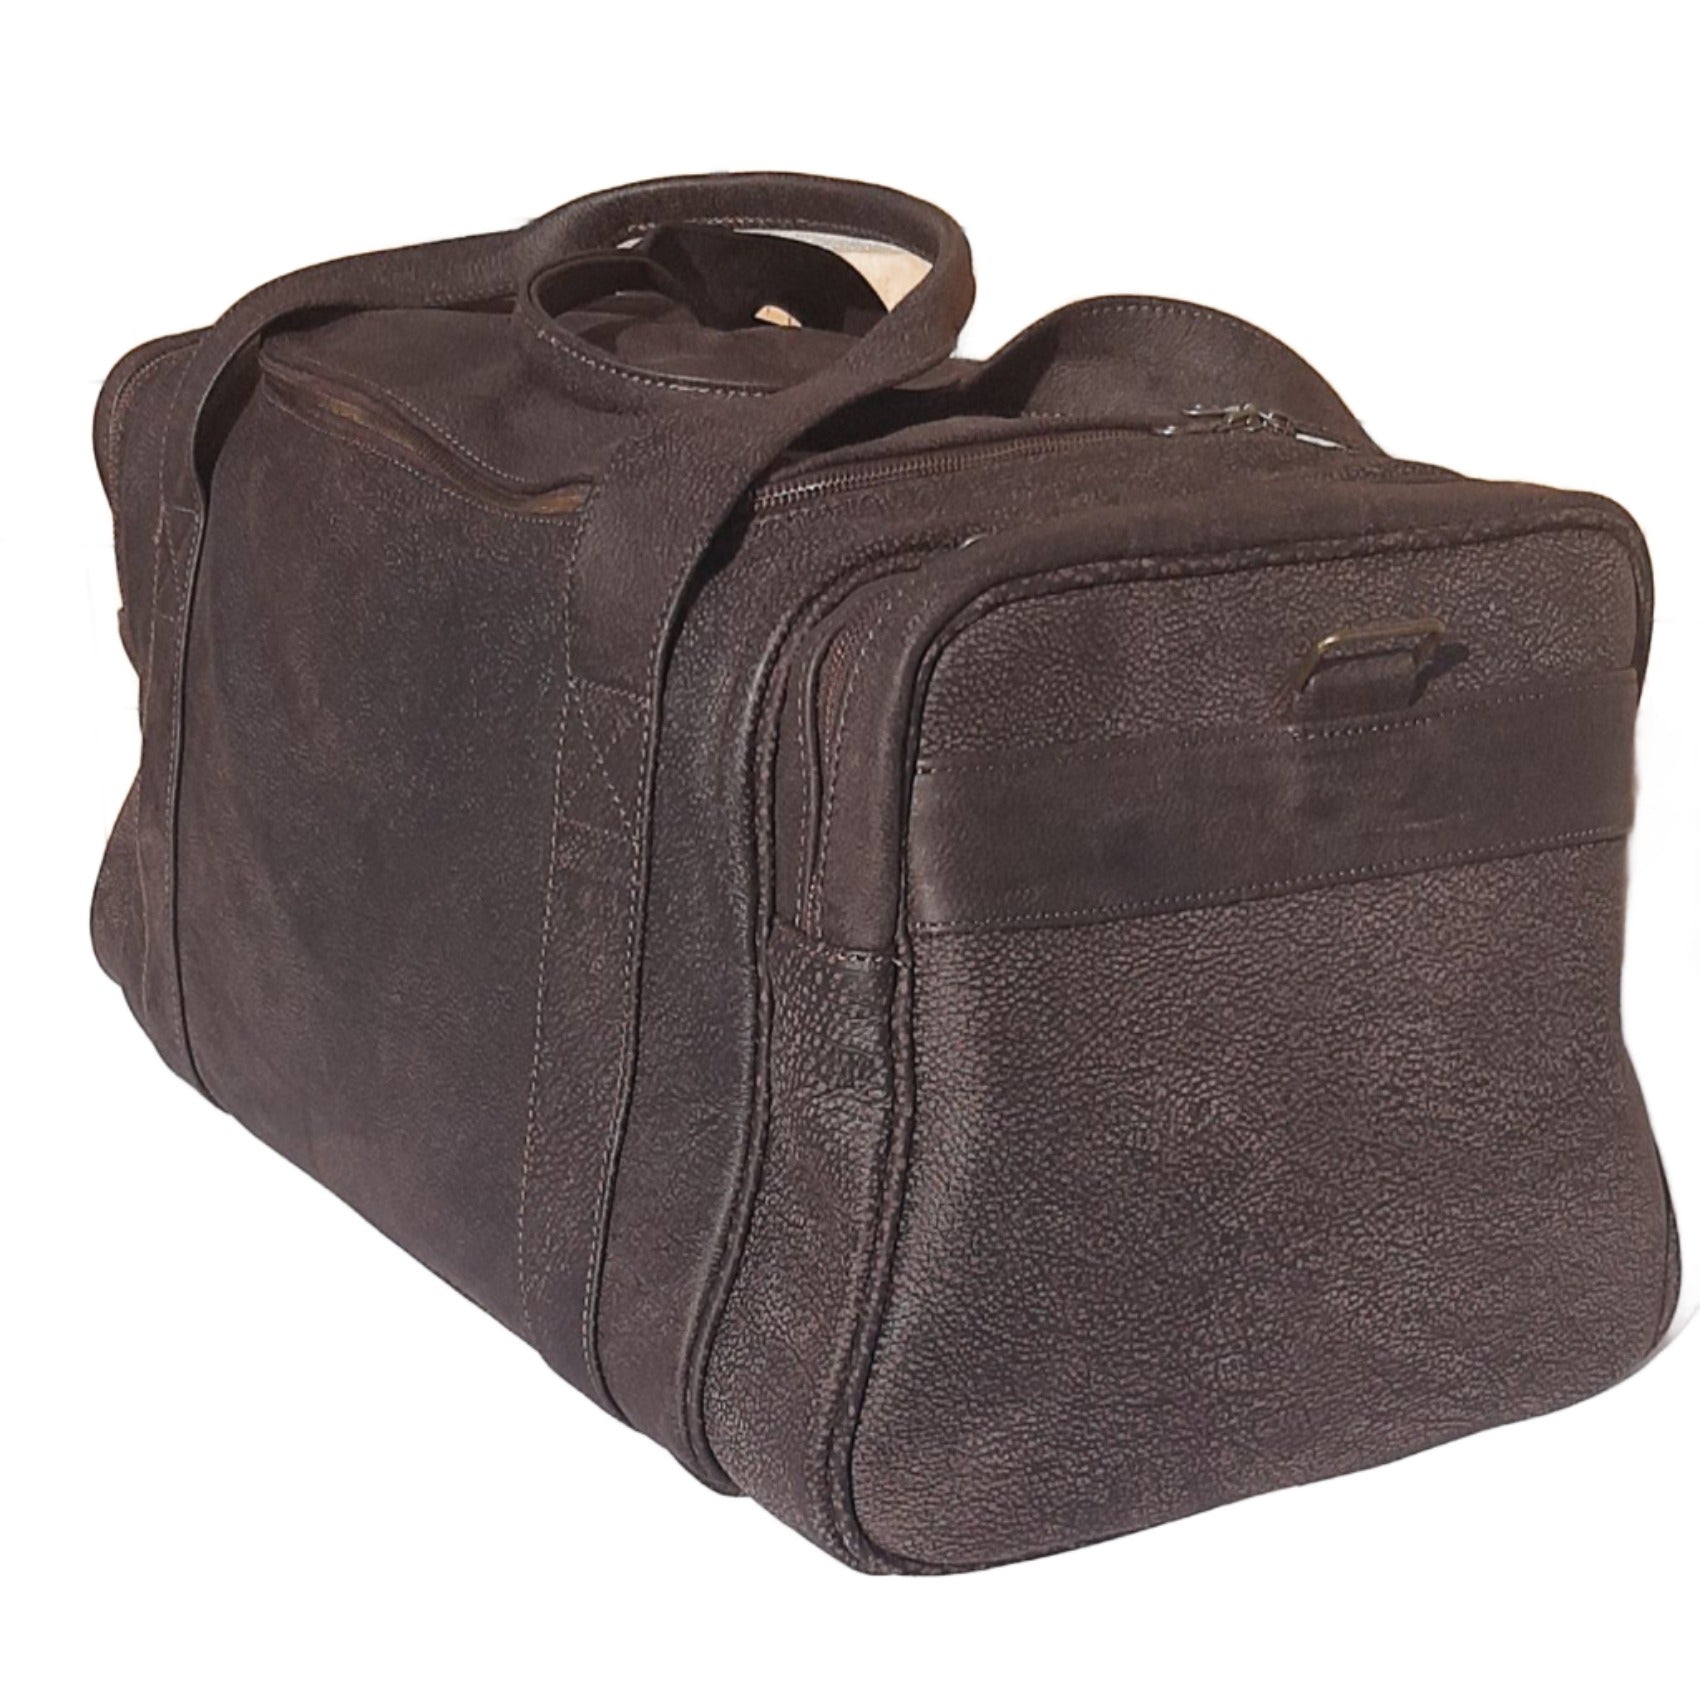 Masai Luggage Bags in Woodlands buffalo, the finest SA travel